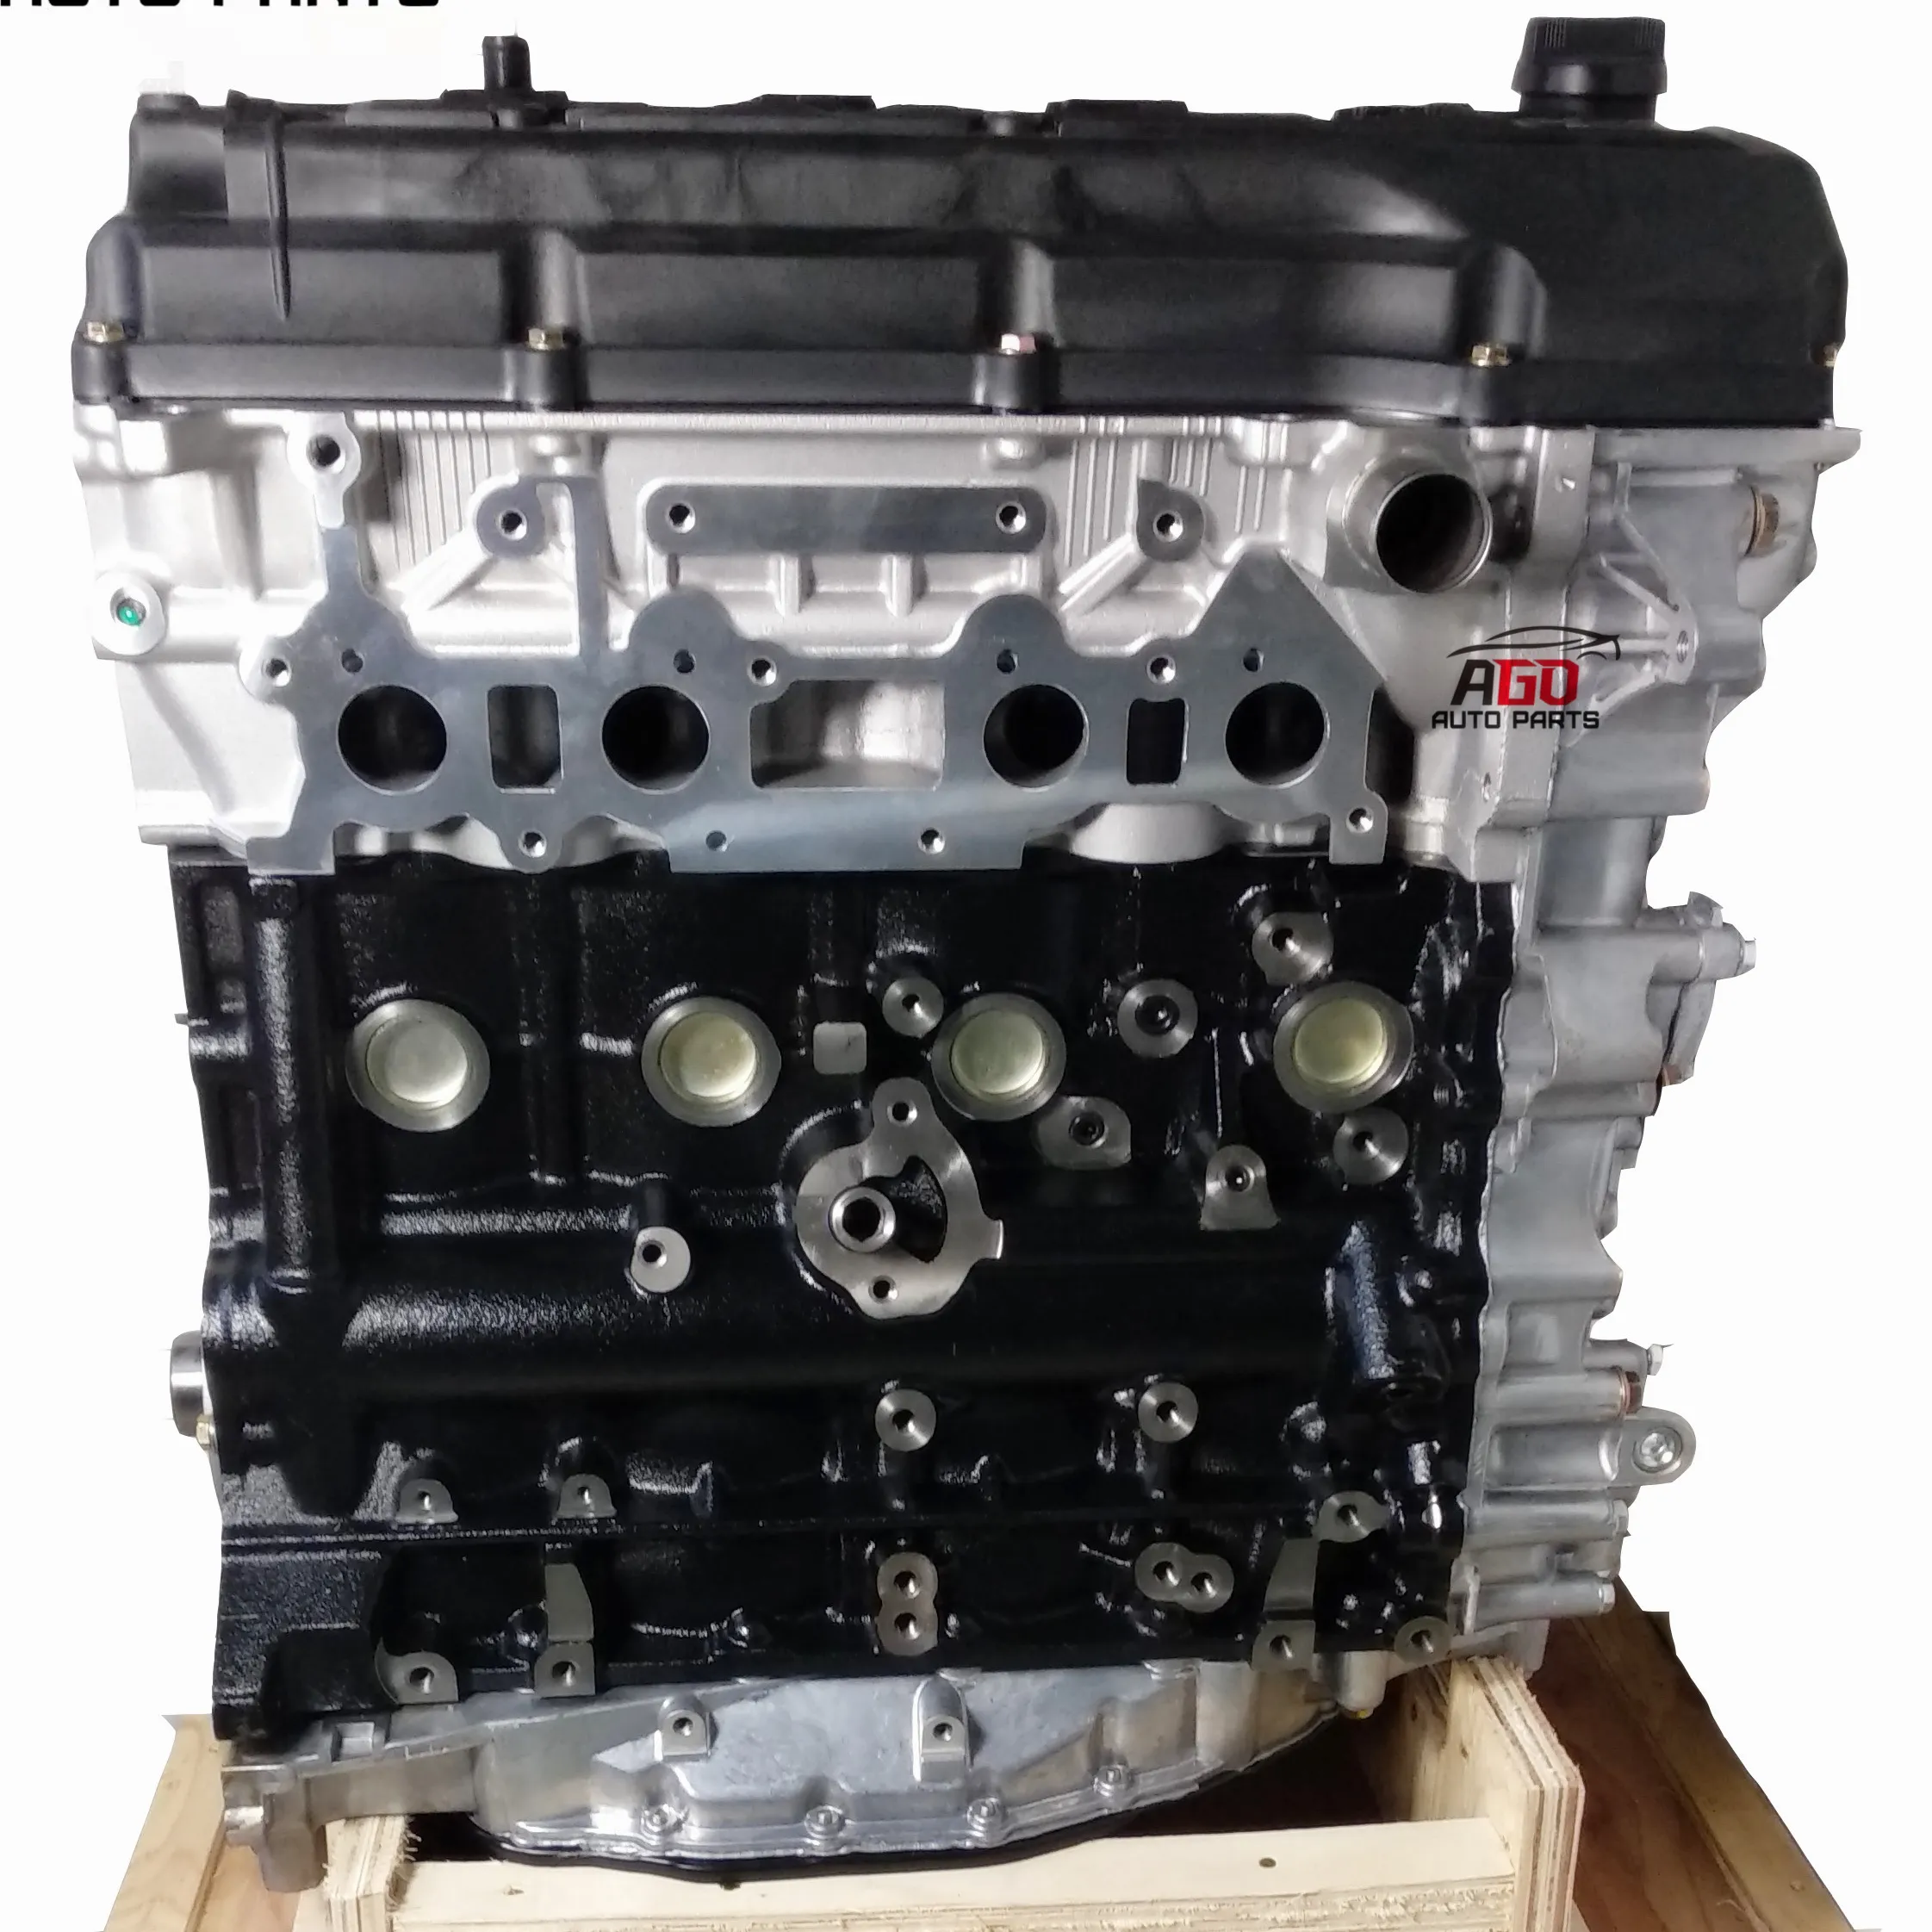 AGO 2tr-fe complete engine 2tr for toyota hilux hiace 2.7l petrol engine assembly